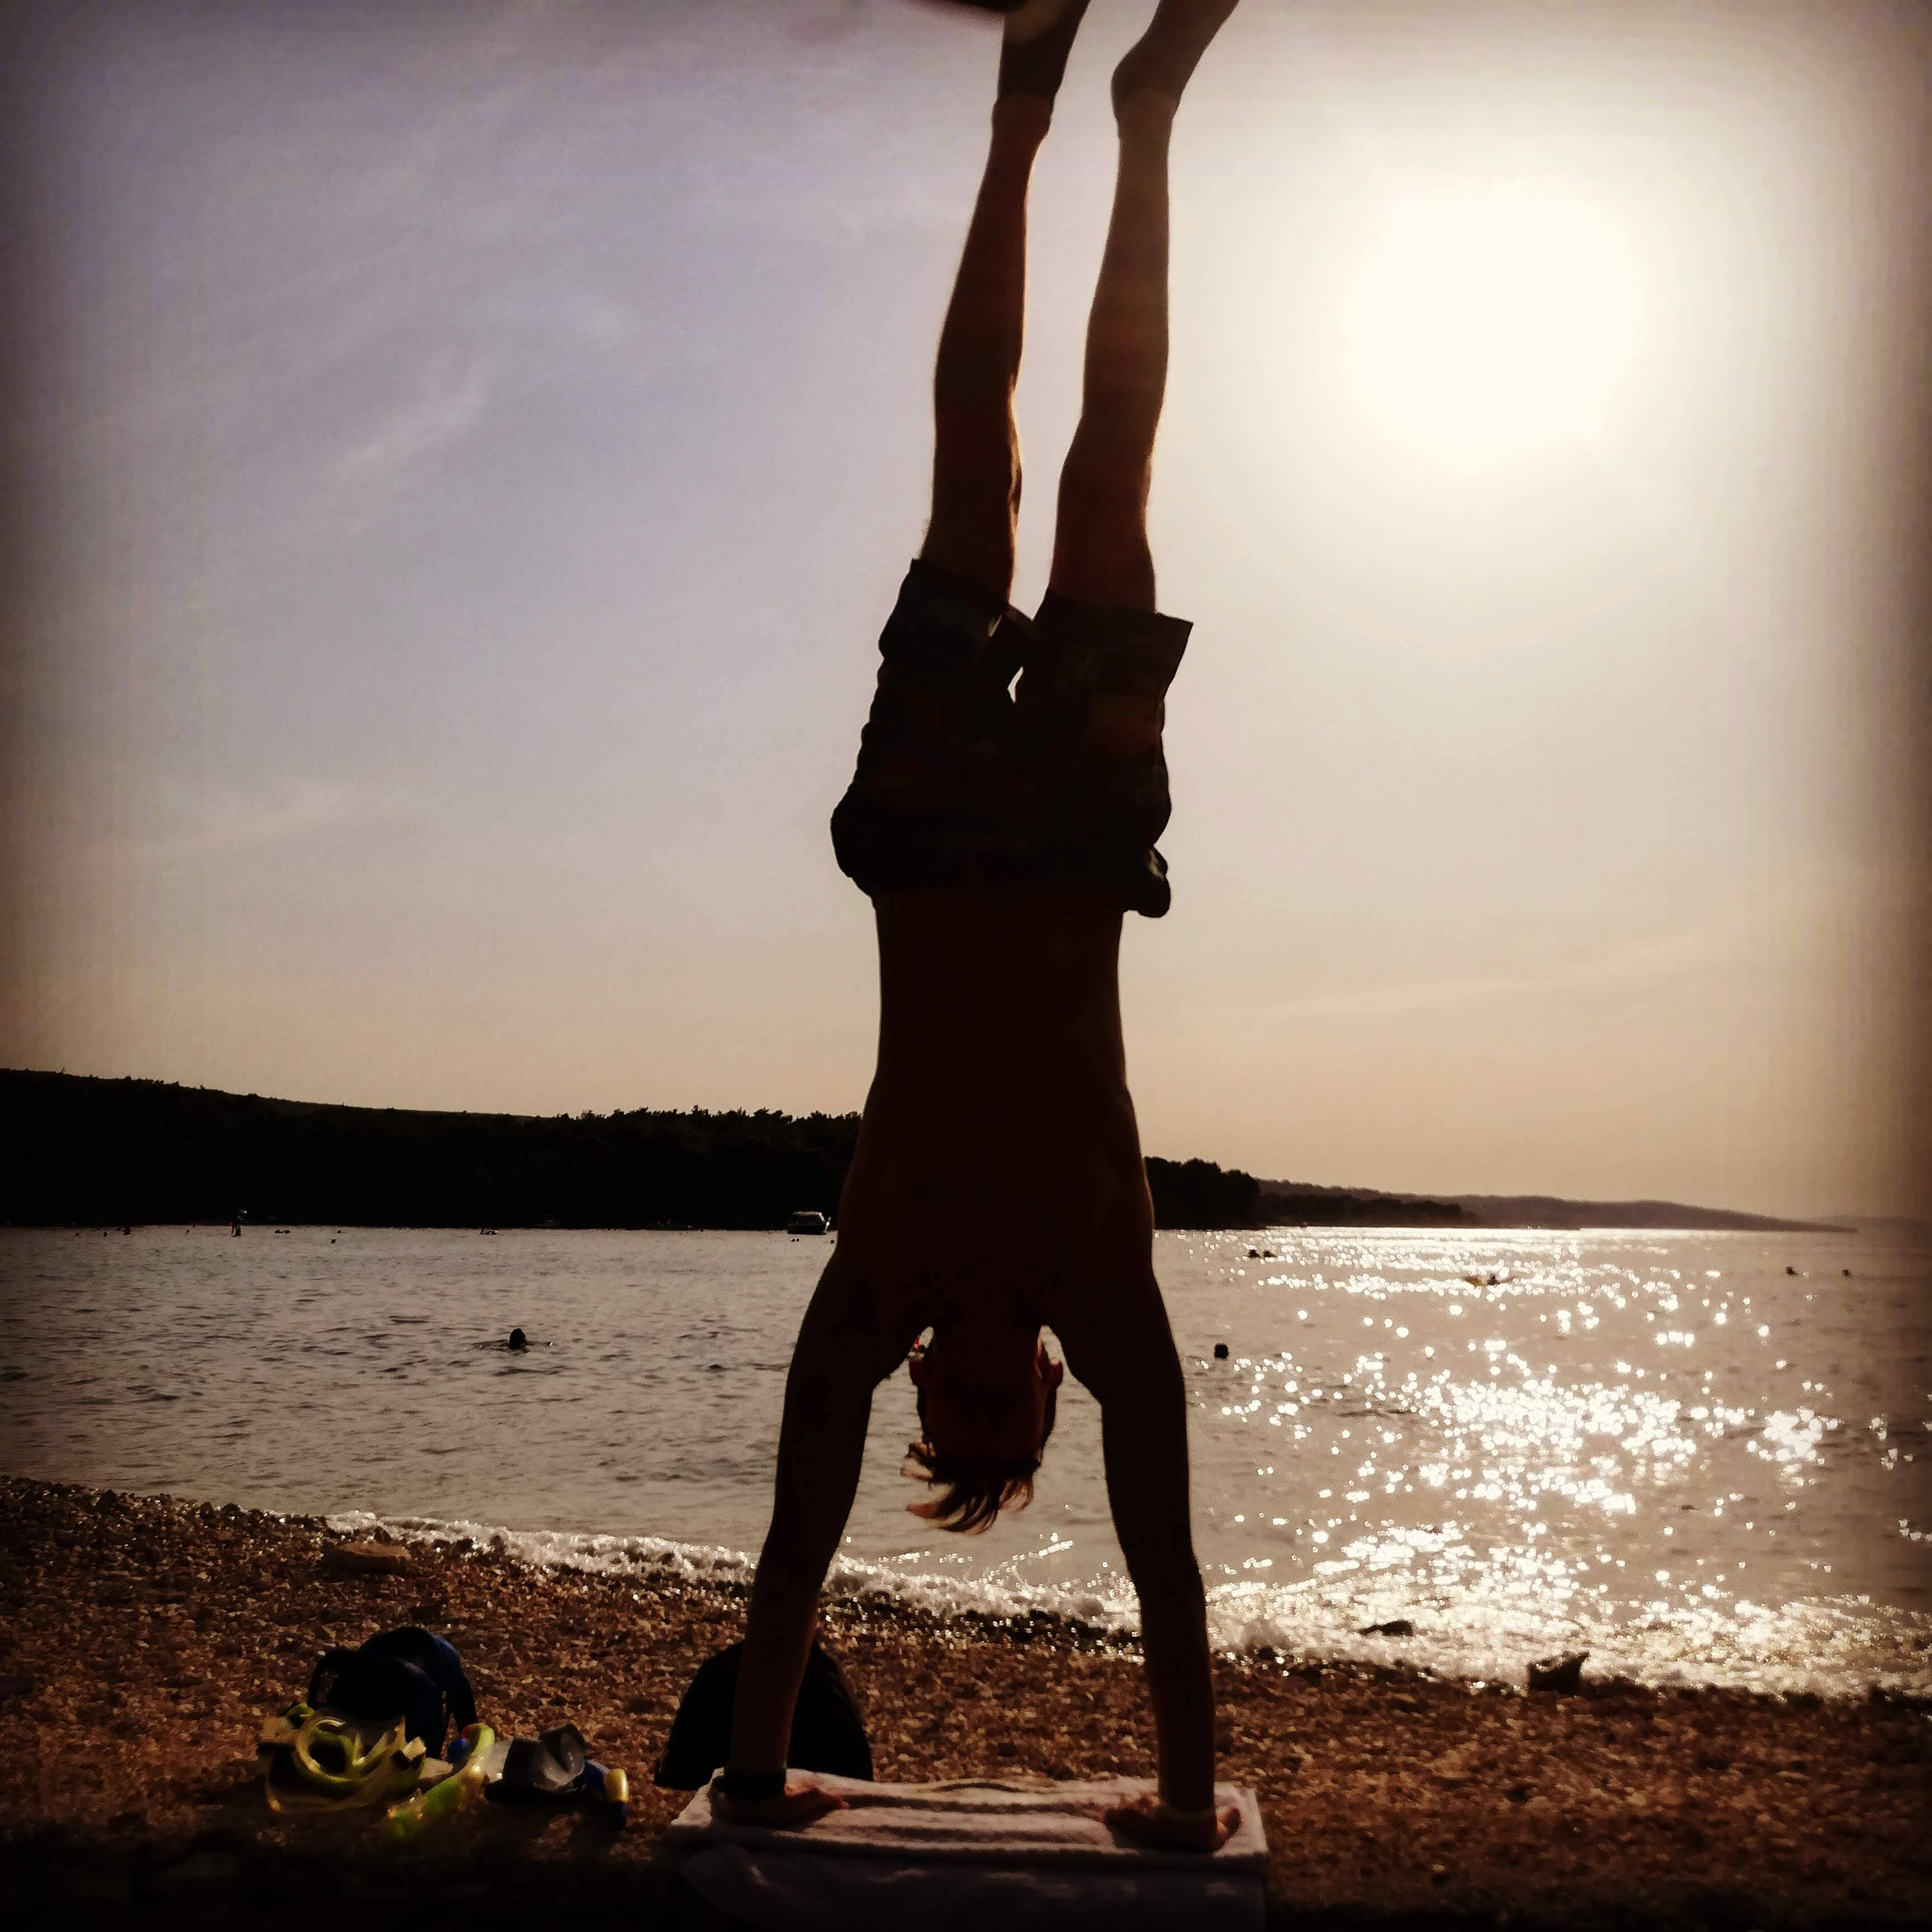 Author doing a handstand